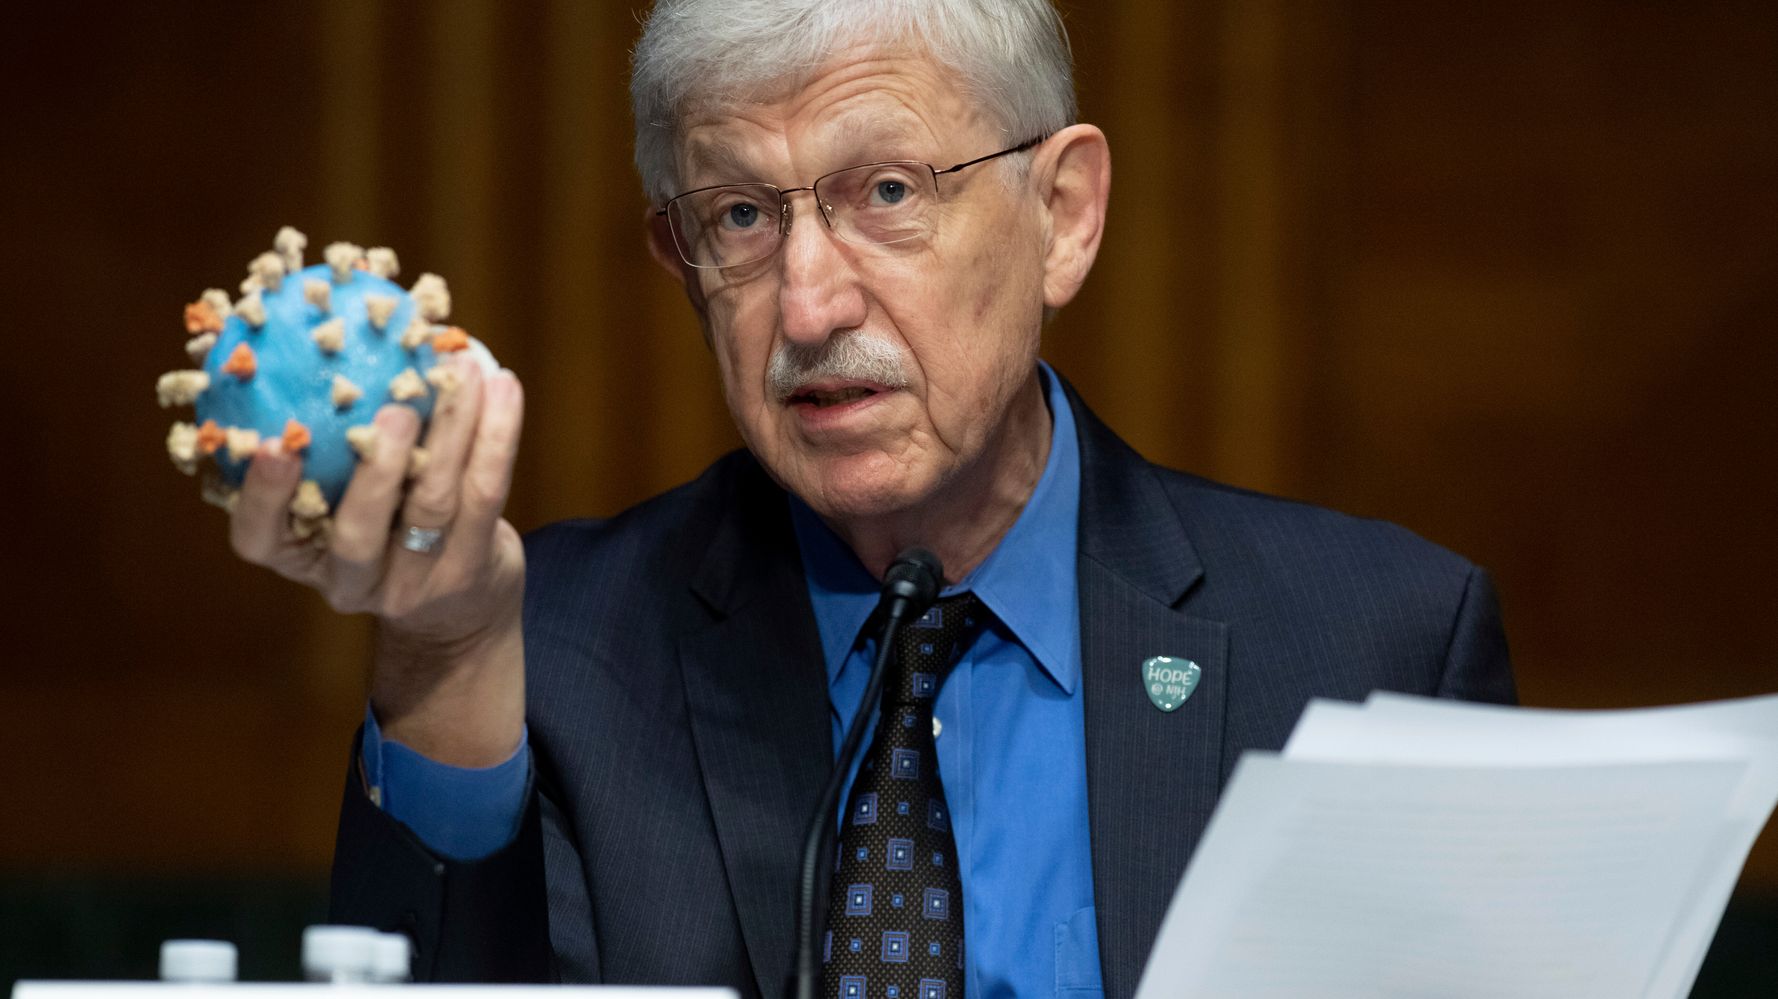 National Institutes of Health Director Urges Americans To Believe Science